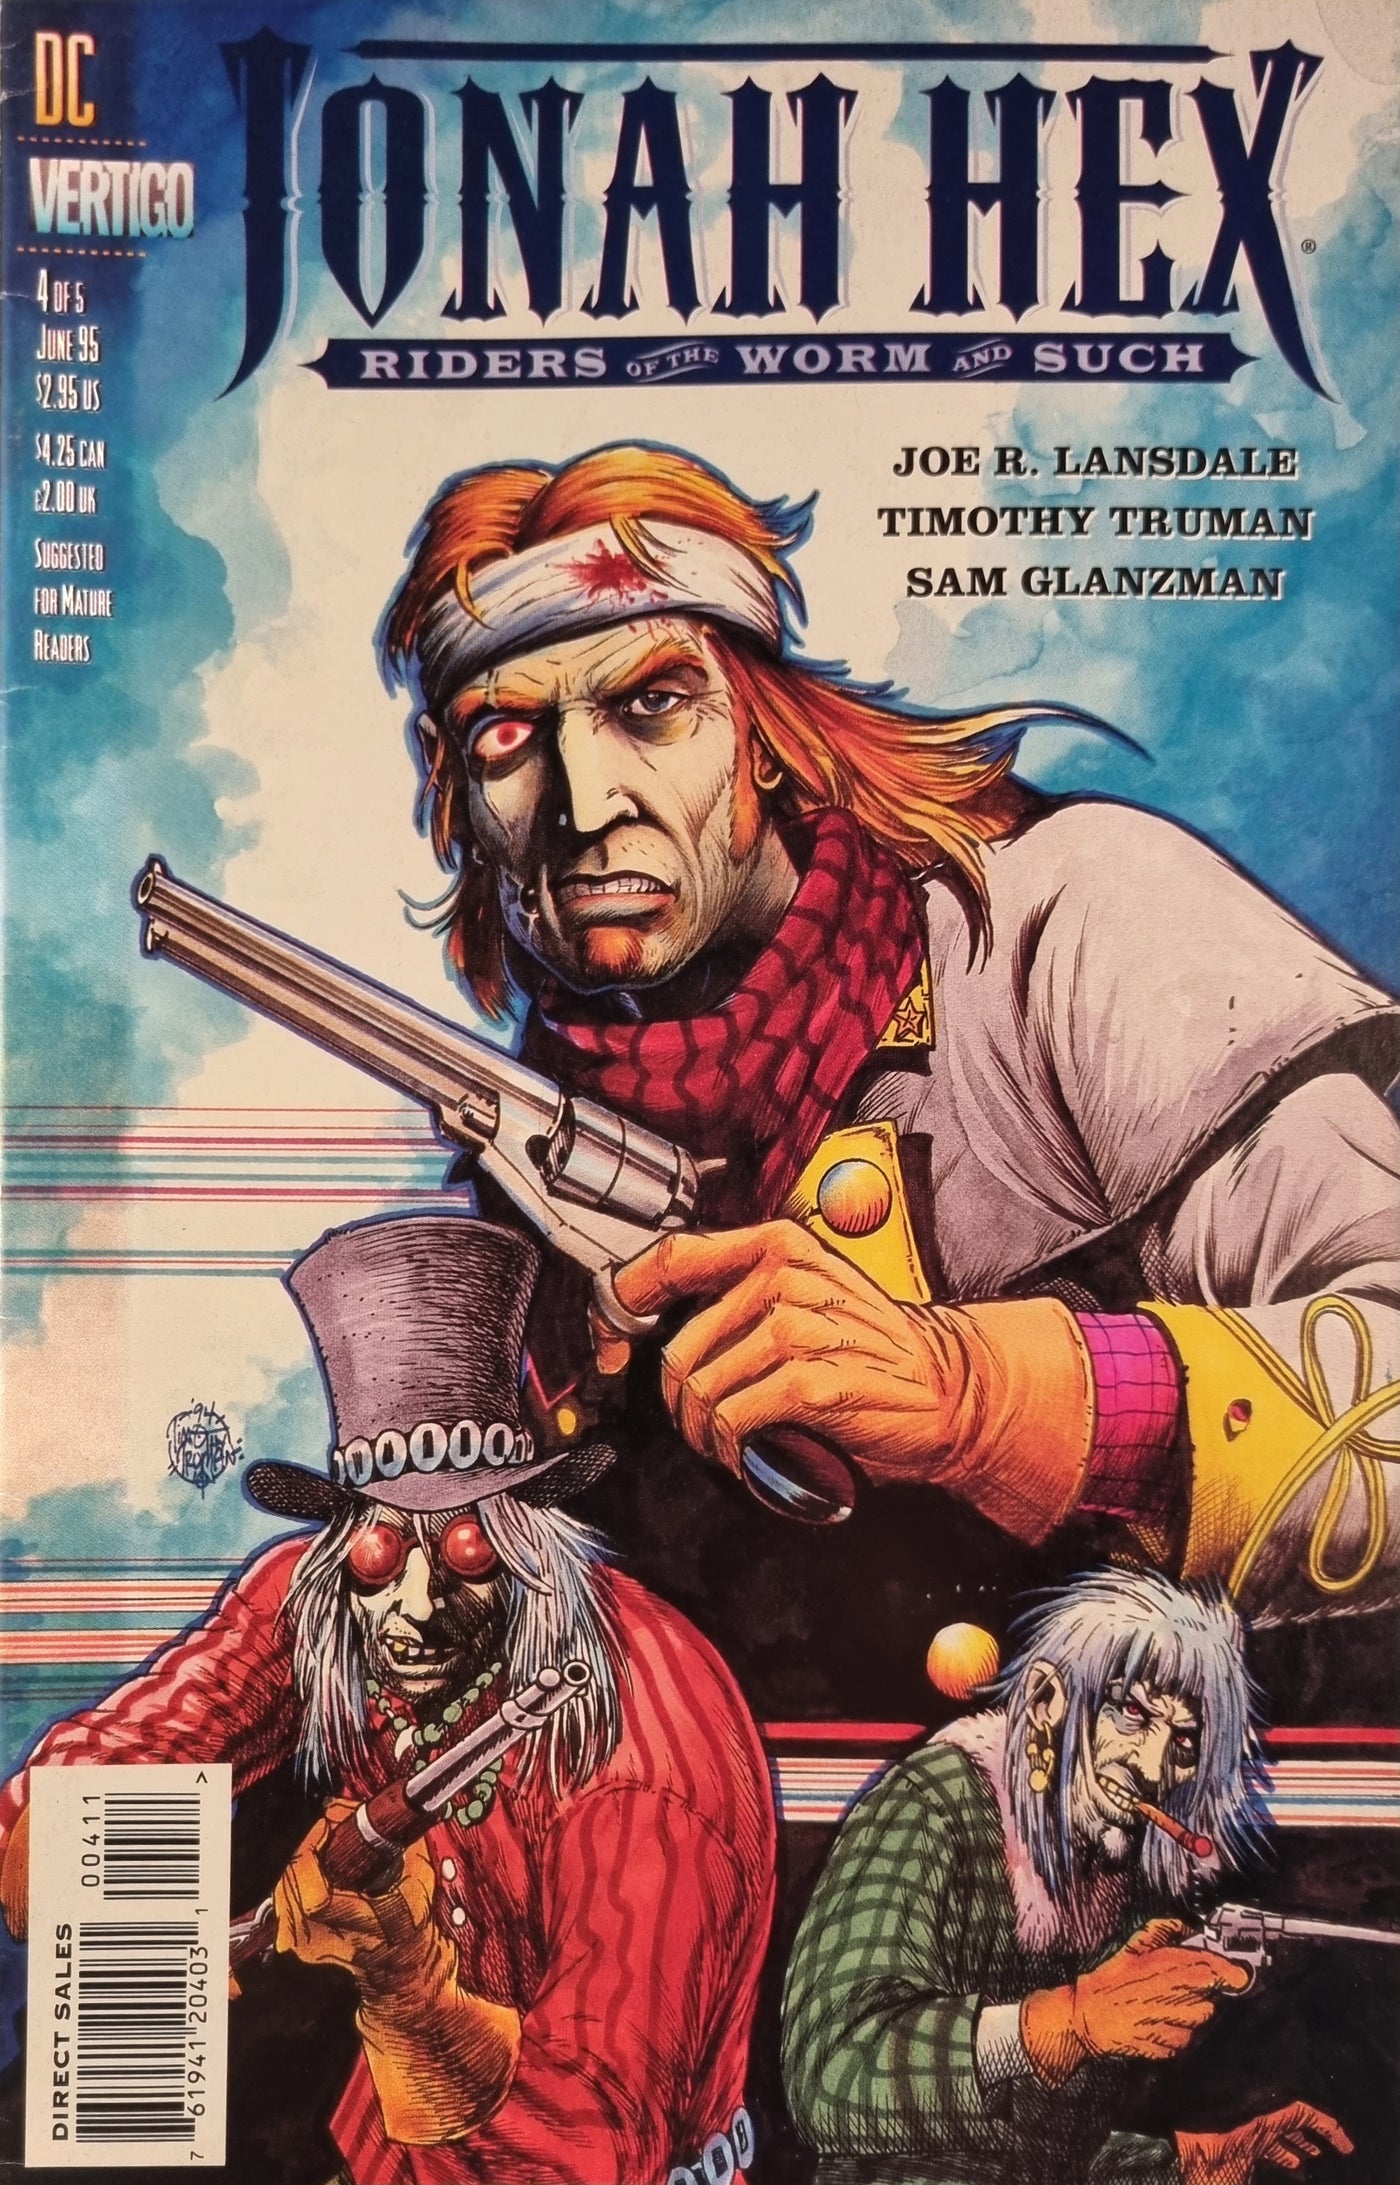 Jonah Hex: Riders of the Worm and Such #4 (of 5)